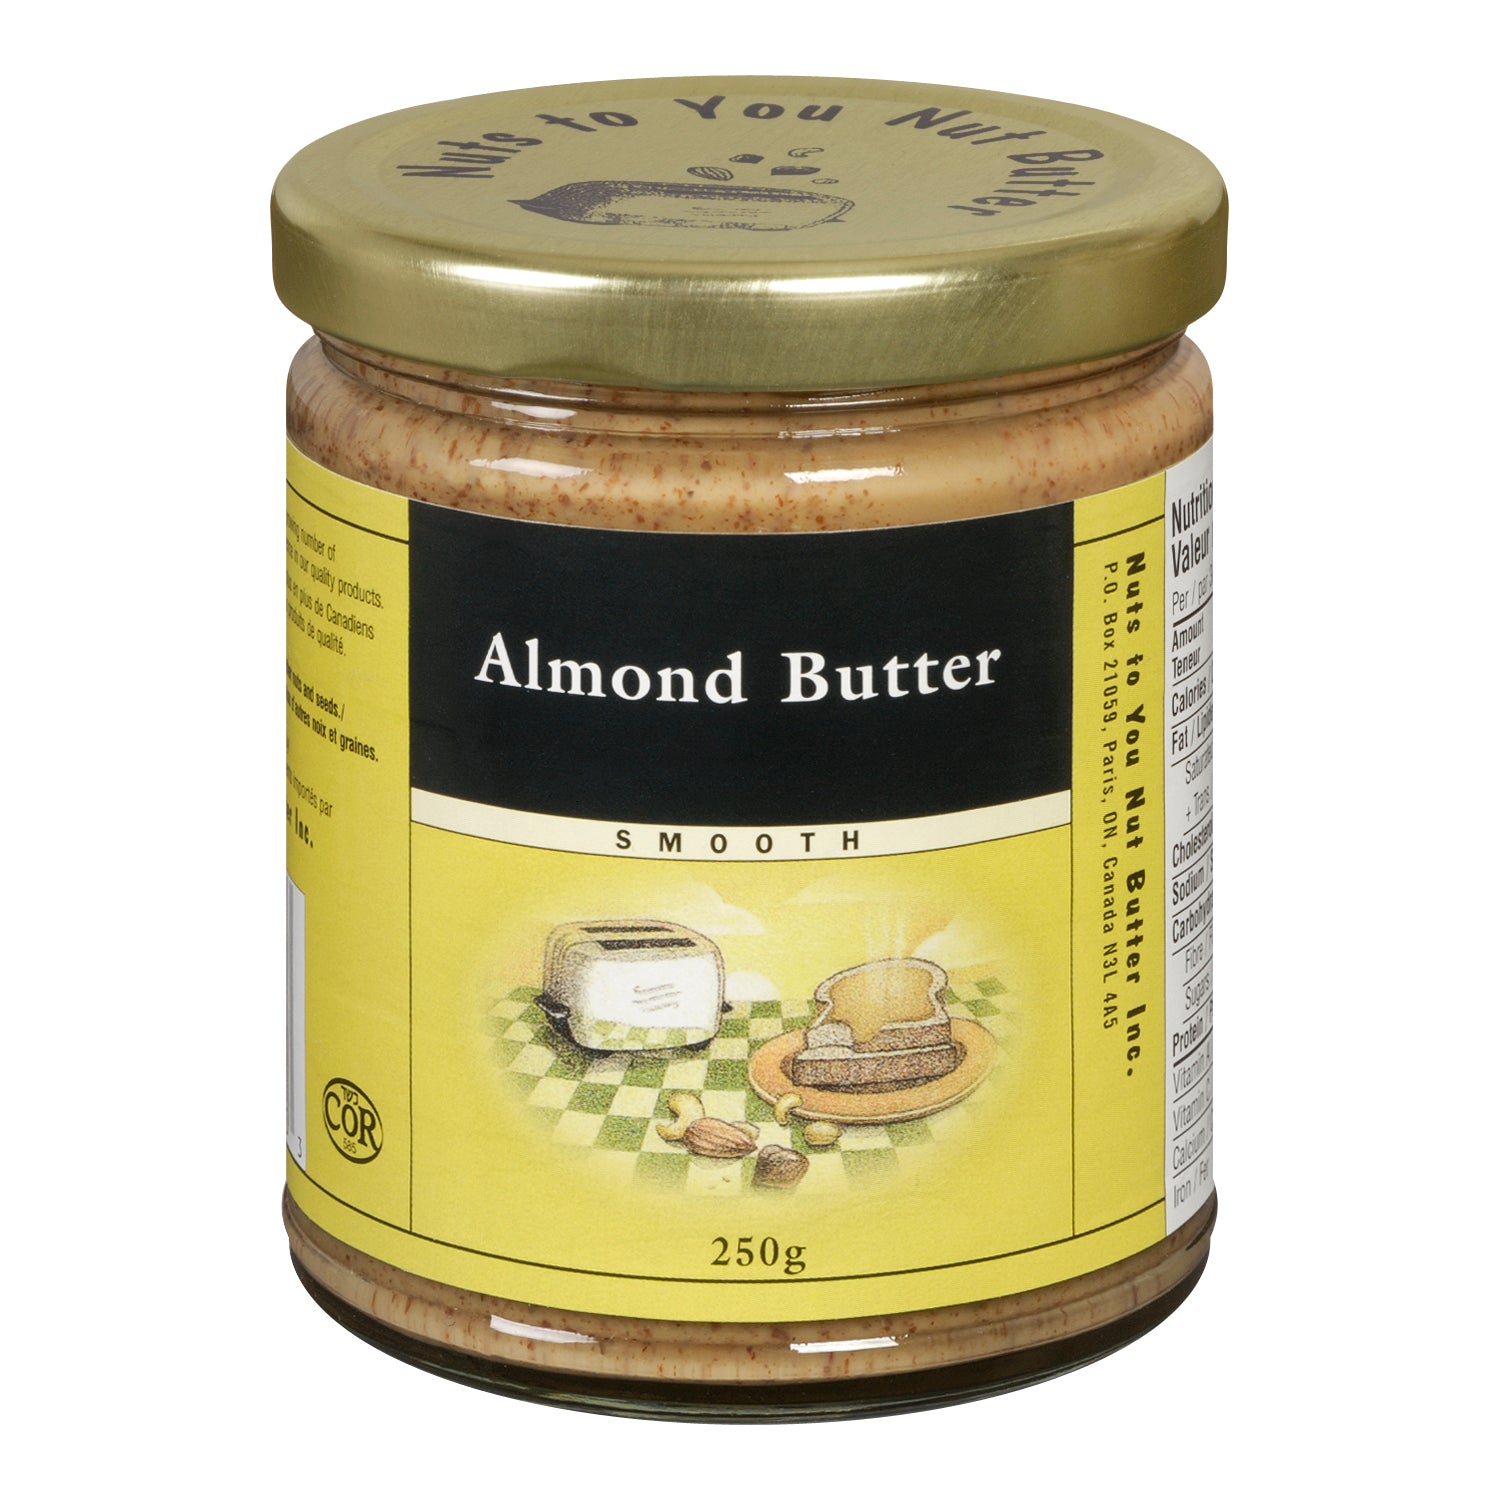 Nuts to You Almond Butter - Smooth (250g) - Lifestyle Markets